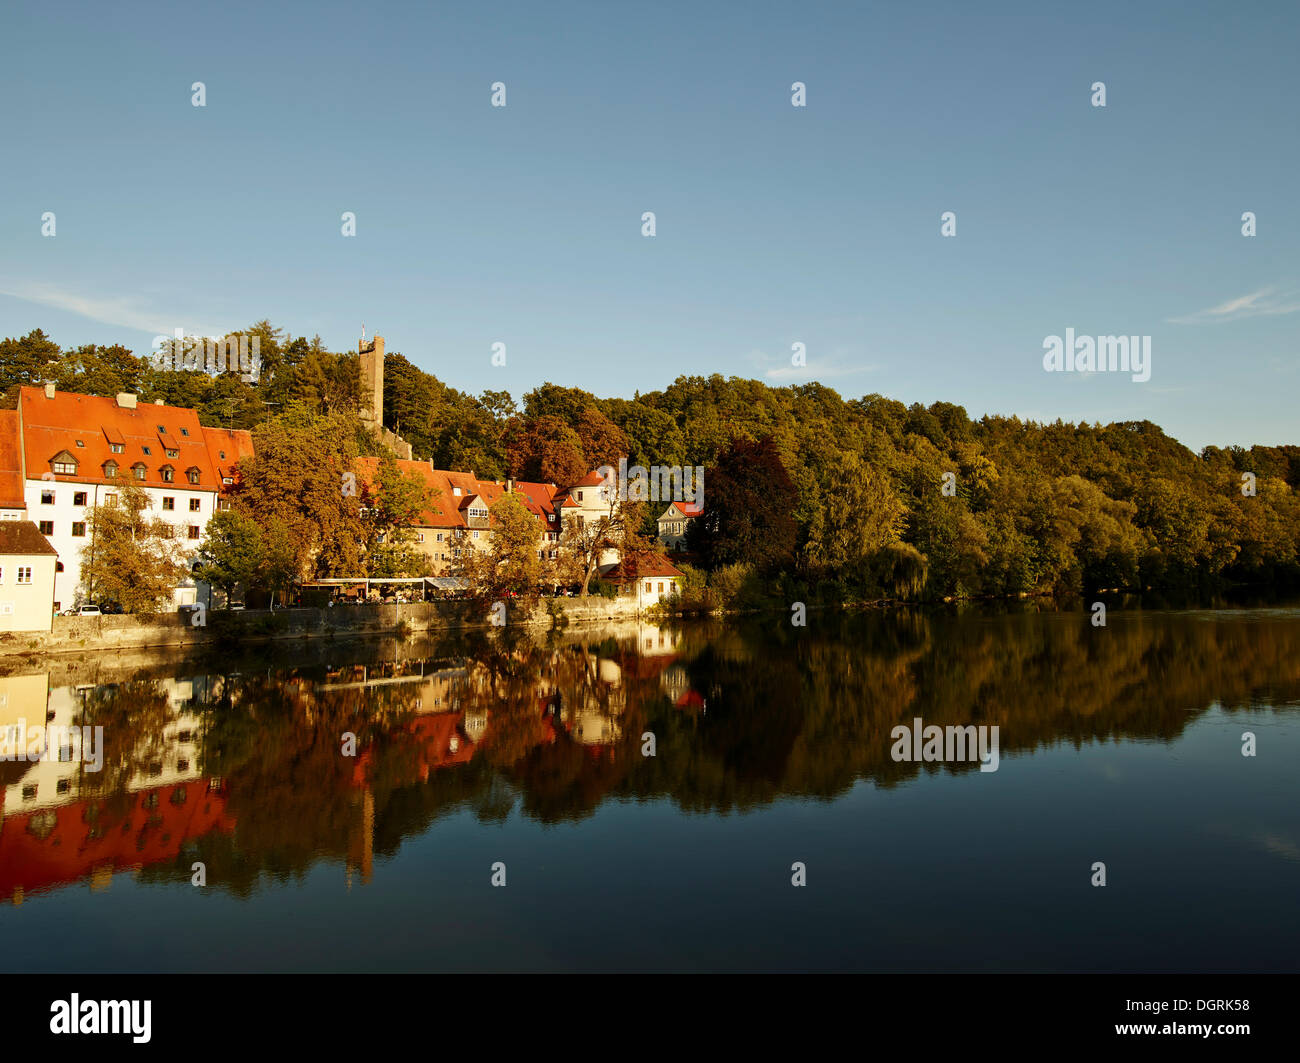 Old town with customs house, Landsberg am Lech, Bavaria Stock Photo